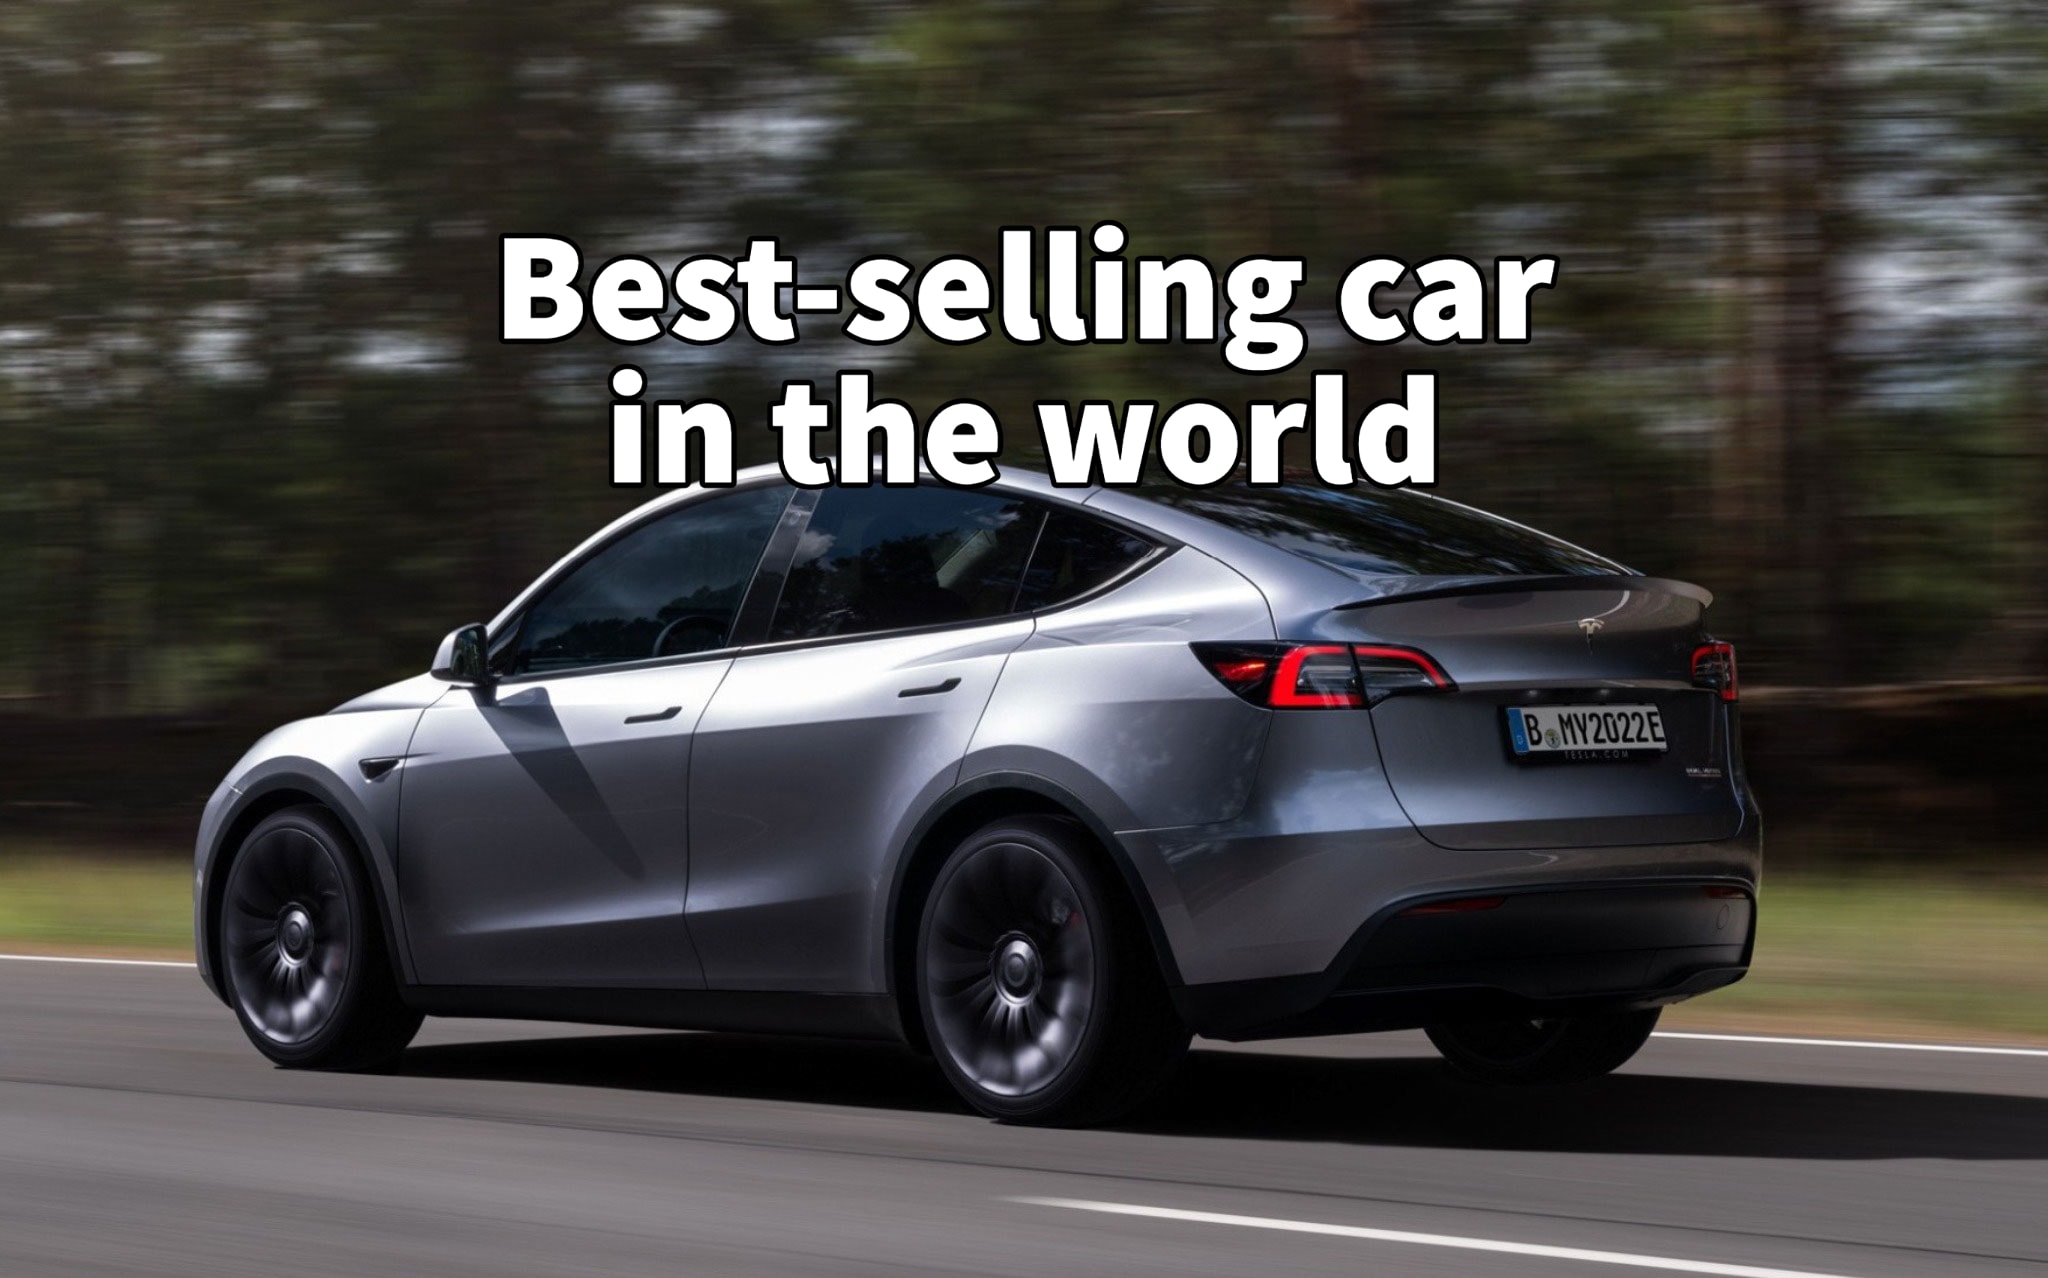 Tesla Model Y Becomes World's 3rd Best-Selling Car Challenging Toyota's  Reign